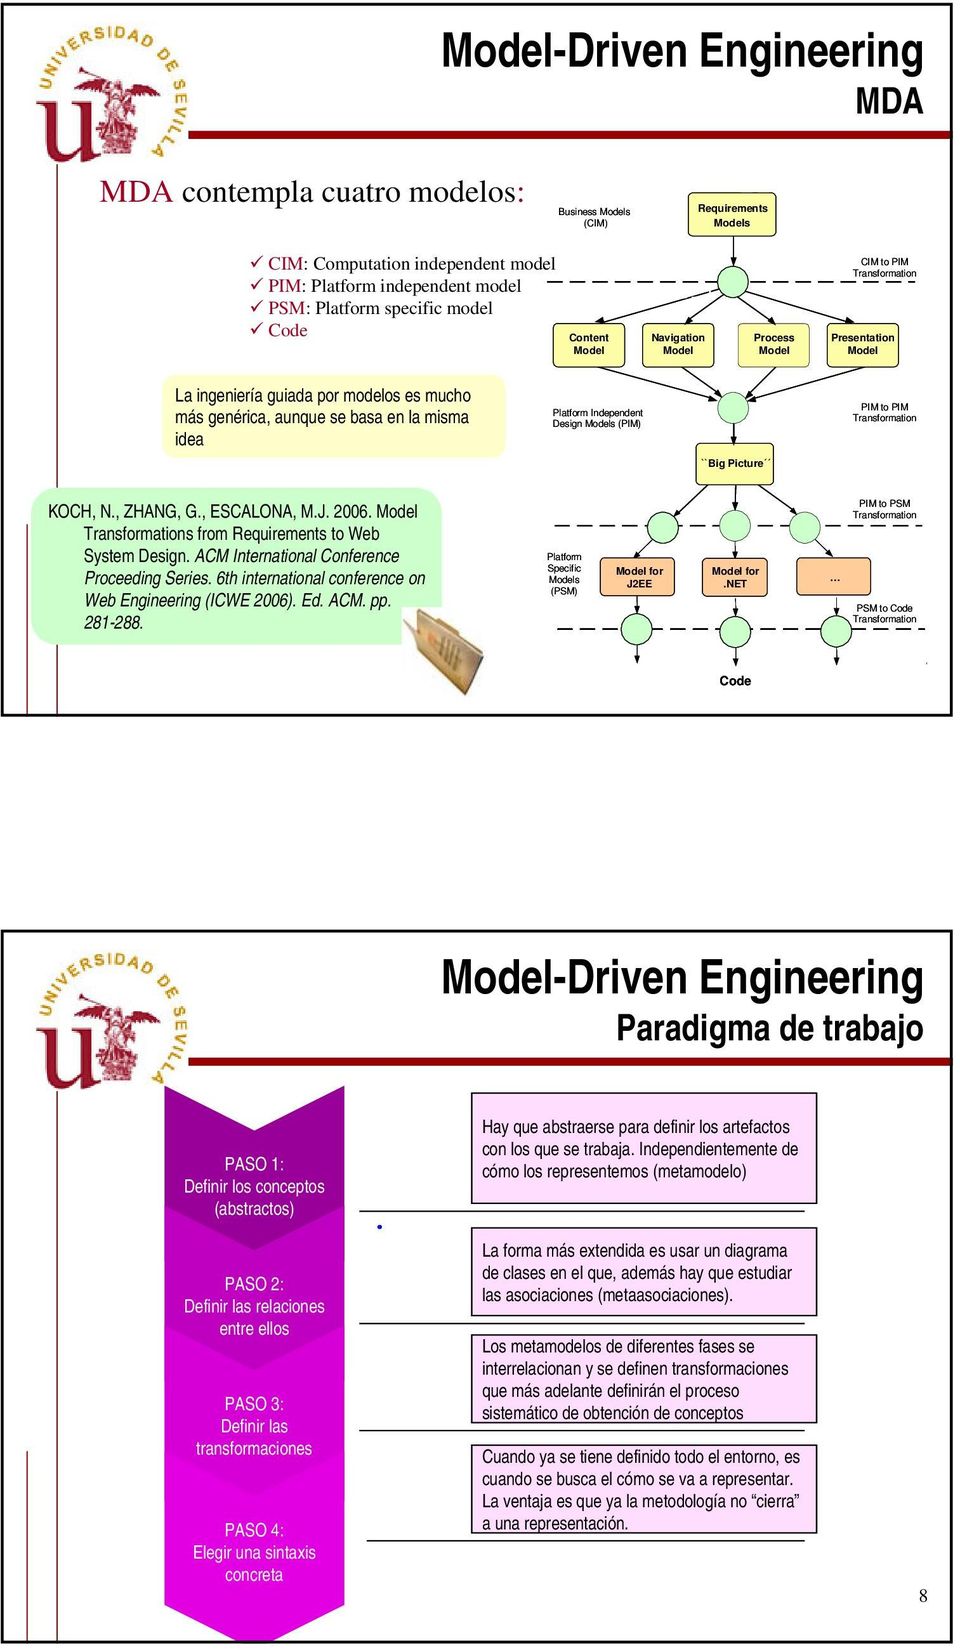 Independent Design Models (PIM) PIM to PIM Transformation ``Big Picture KOCH, N., ZHANG, G., ESCALONA, M.J. 2006. Model Transformations from Requirements to Web System Design.